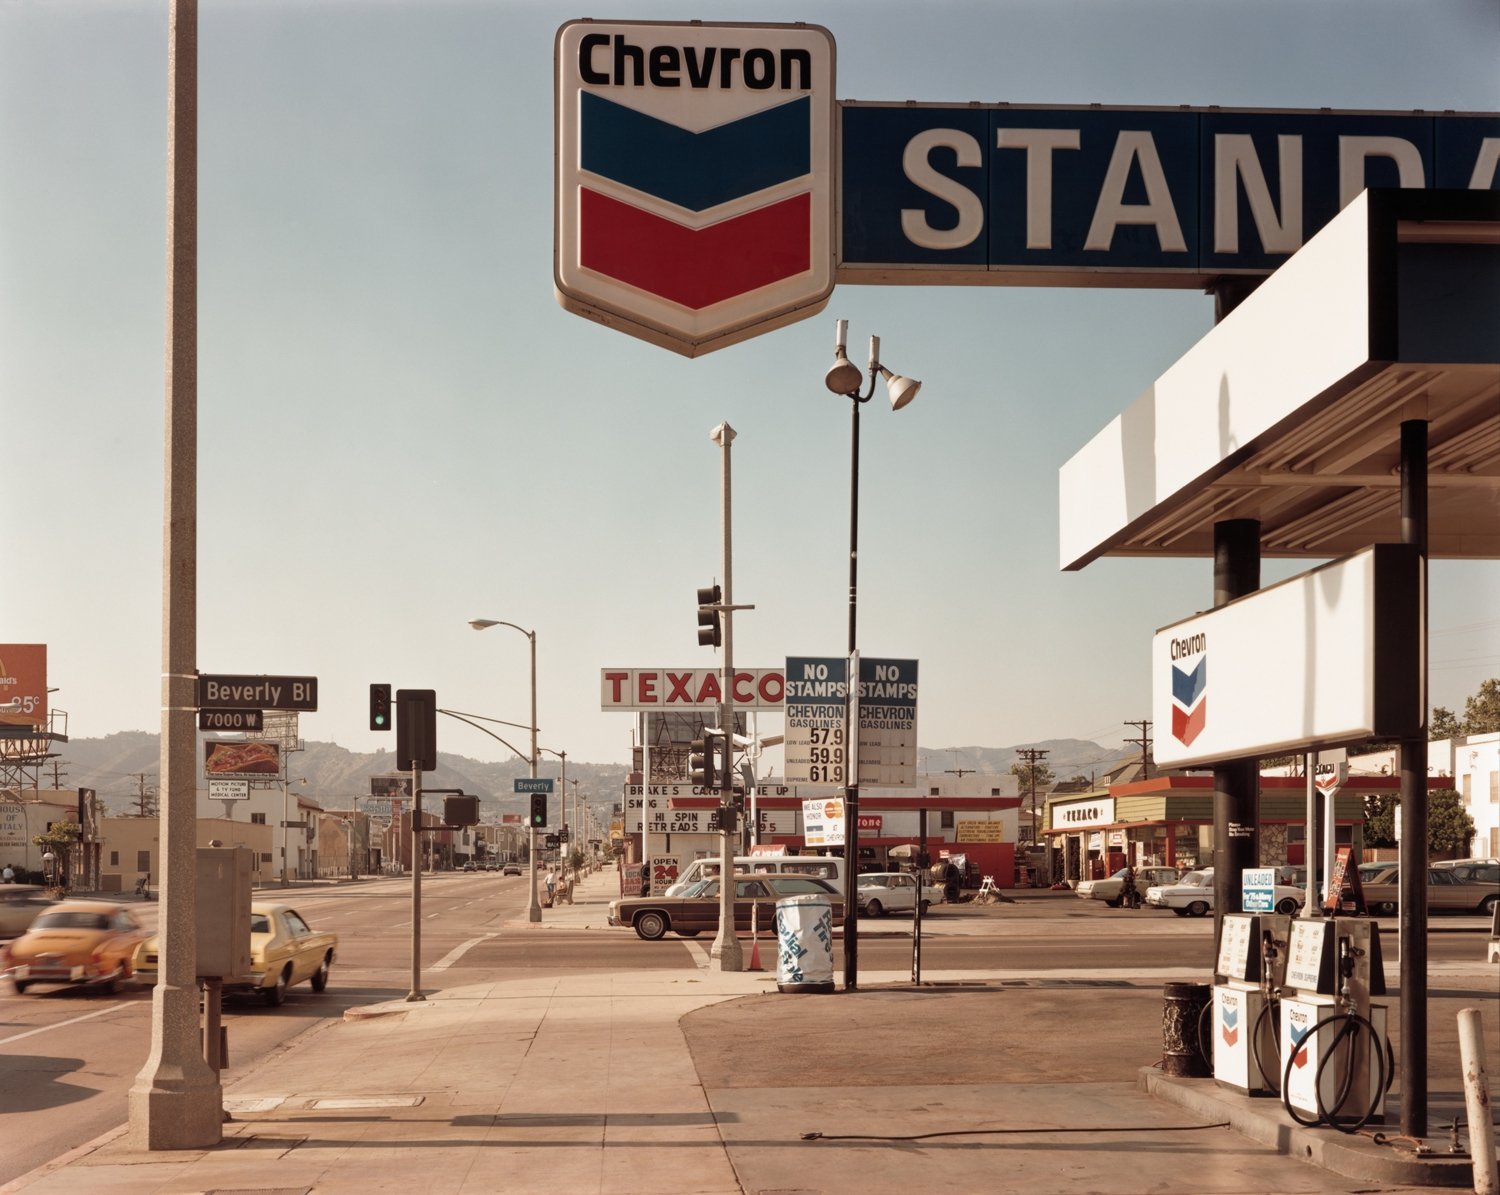  Stephen Shore,  La Brea Avenue and Beverly Boulevard, Los Angeles, California,  June 21, 1975, 1975 printed c. 1975. Courtesy of the Pilara Family Foundation Collection and Sotheby’s. 